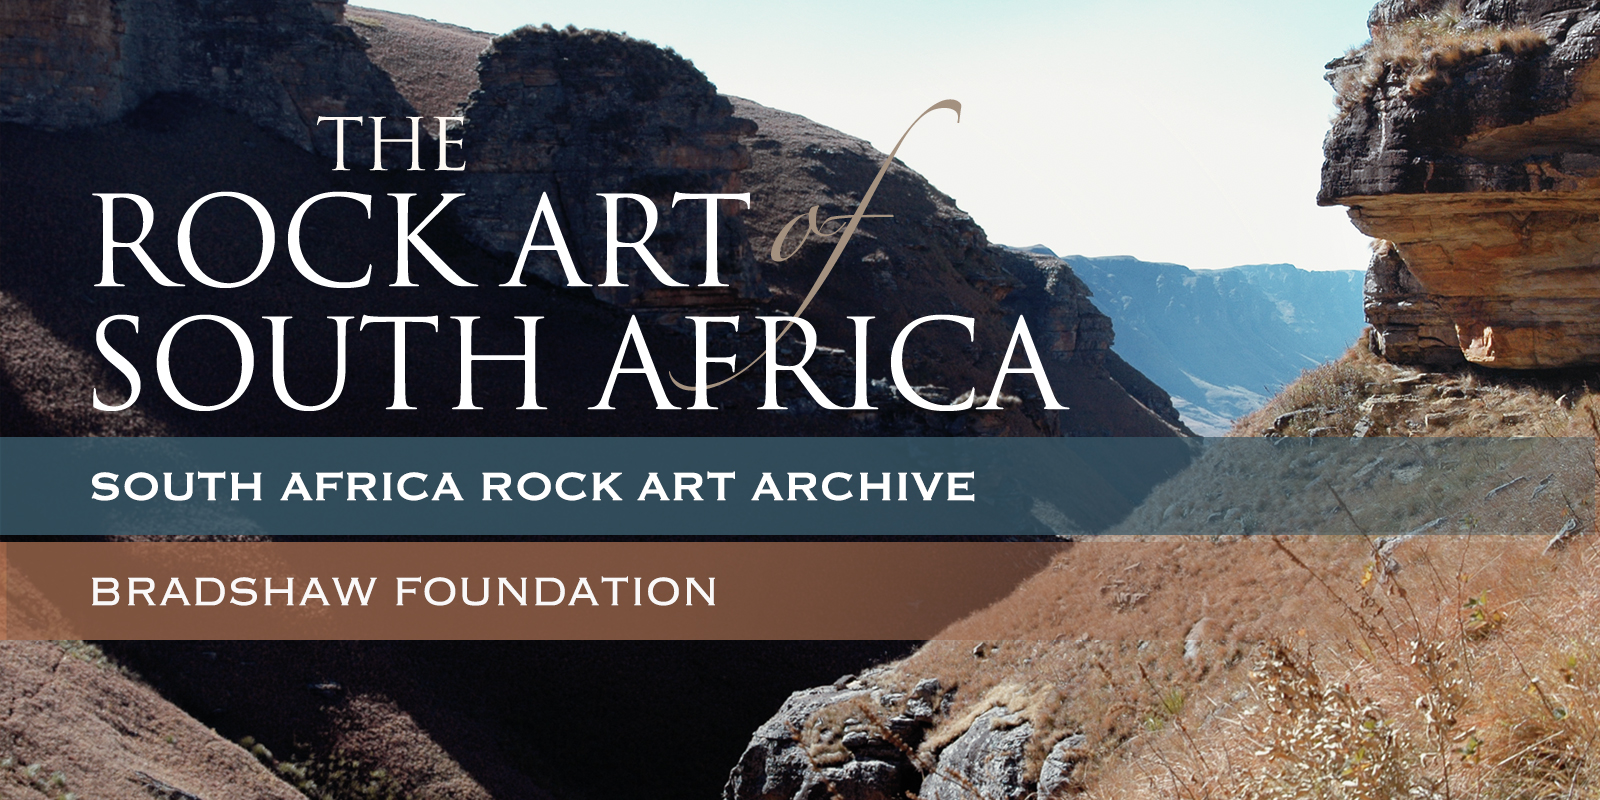 The South Africa Rock Art Gallery